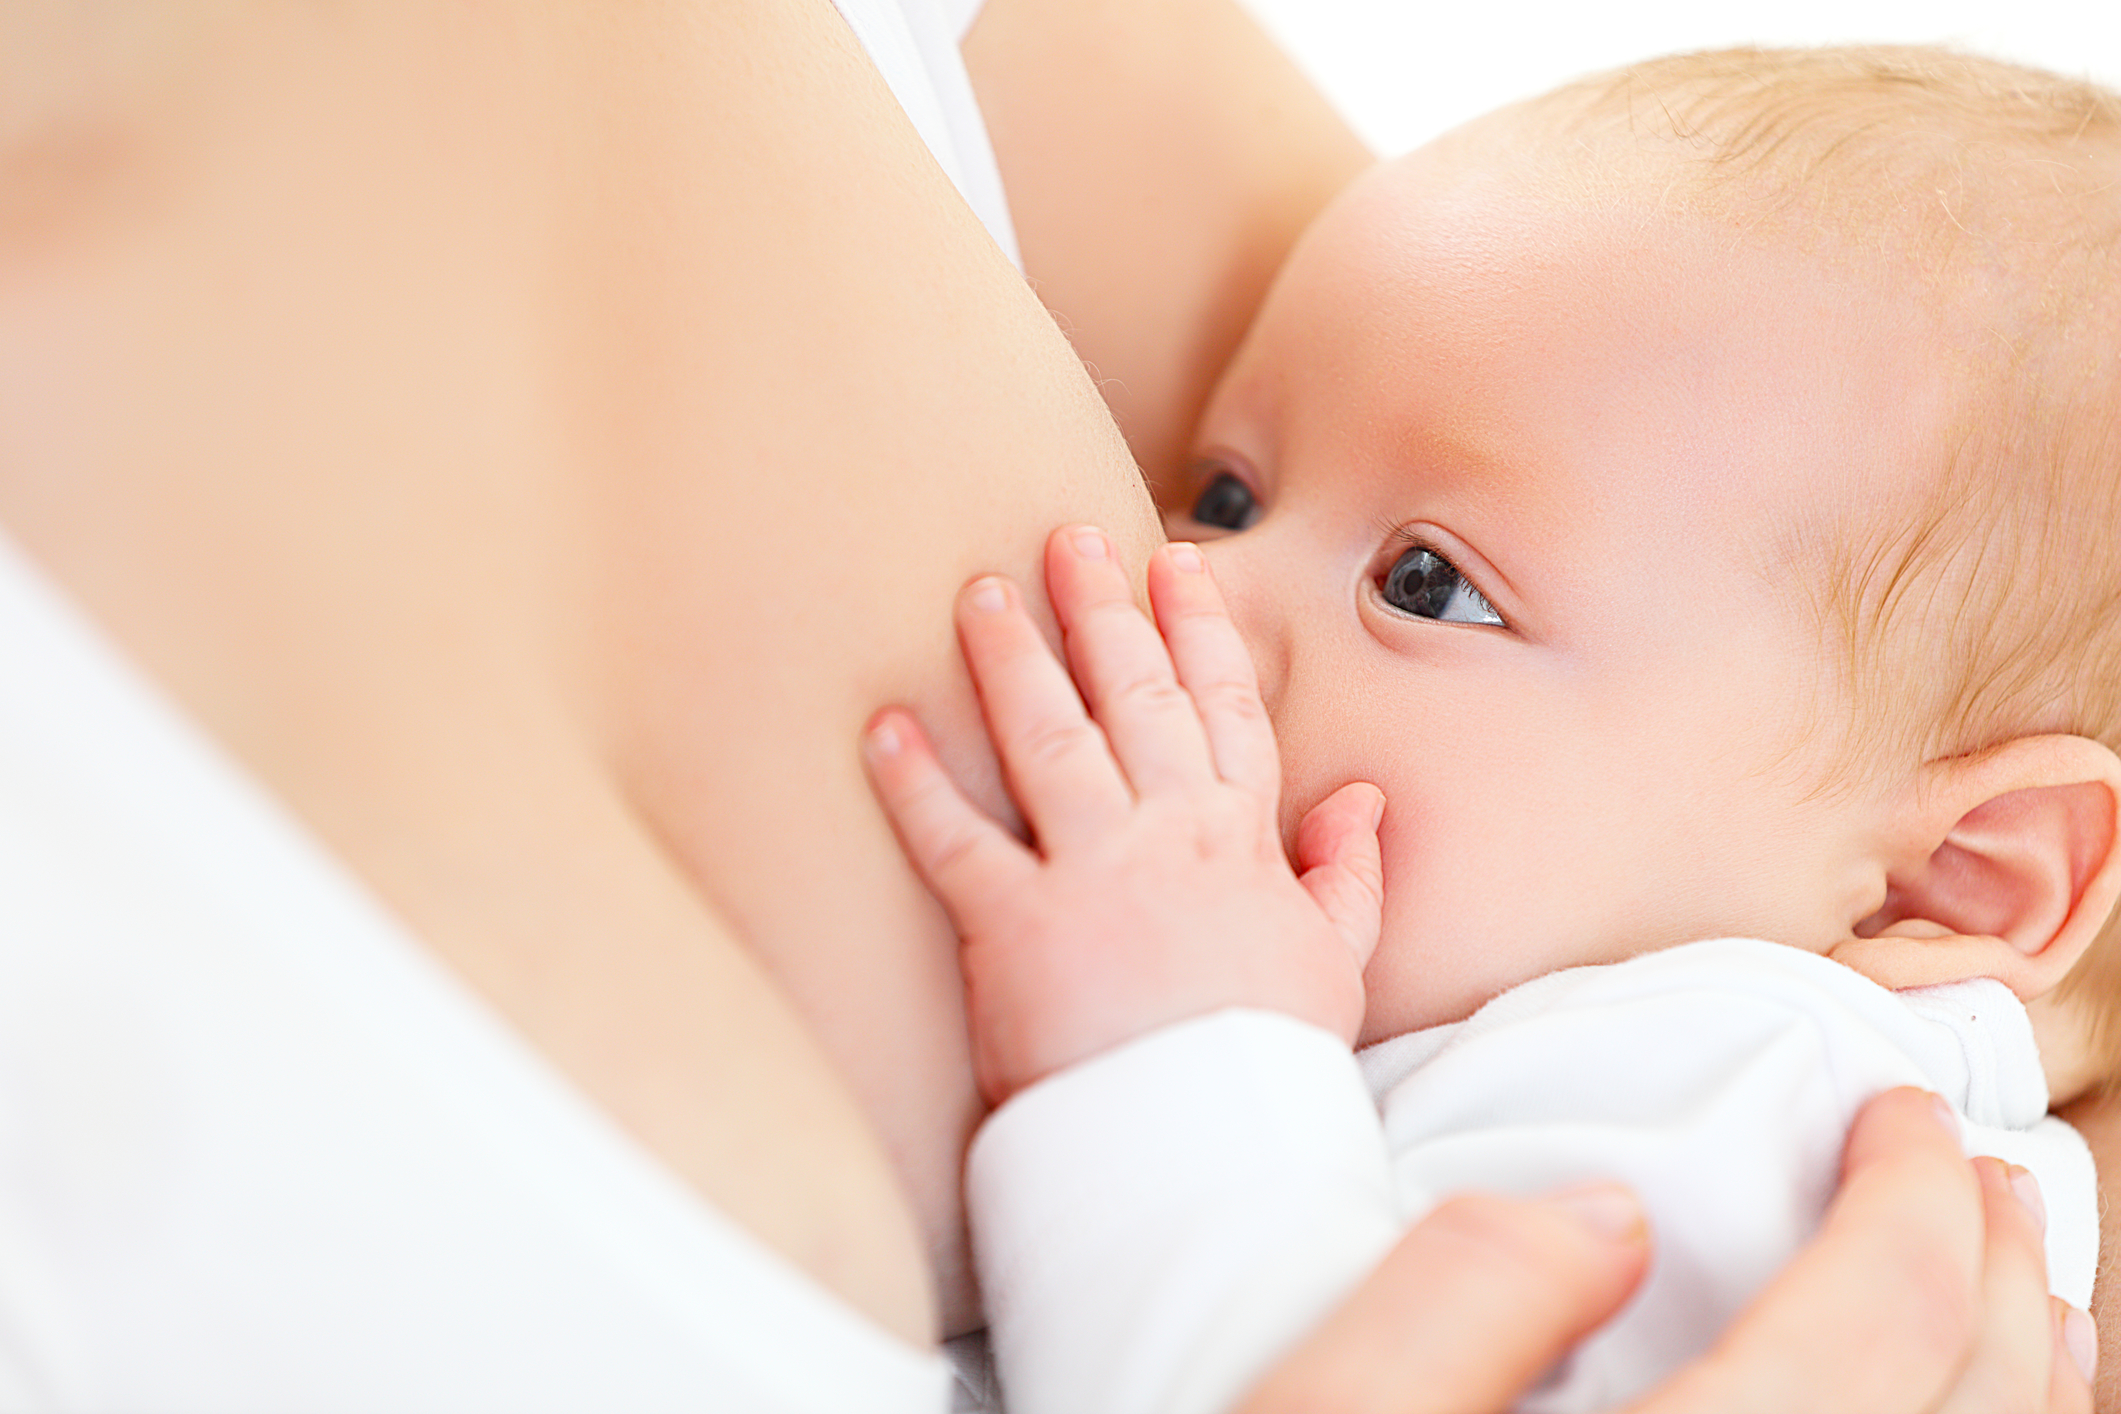 Breastfeeding-only linked to less severe eczema